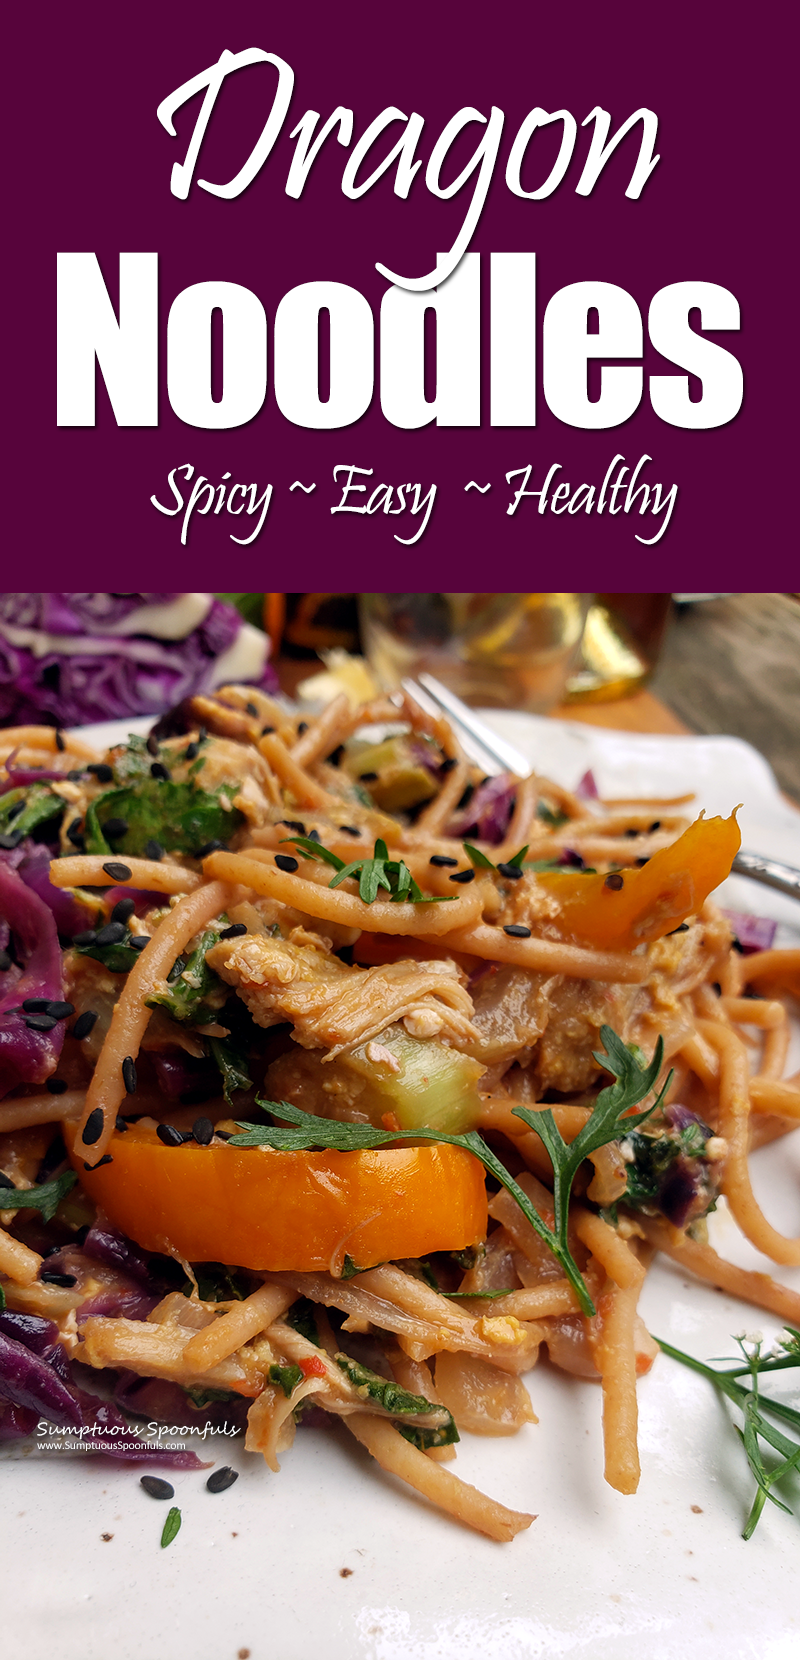 Dragon Noodles with Chicken ~ a healthy hearty meal you can toss together in 30 minutes! Spicy, easy and healthy.